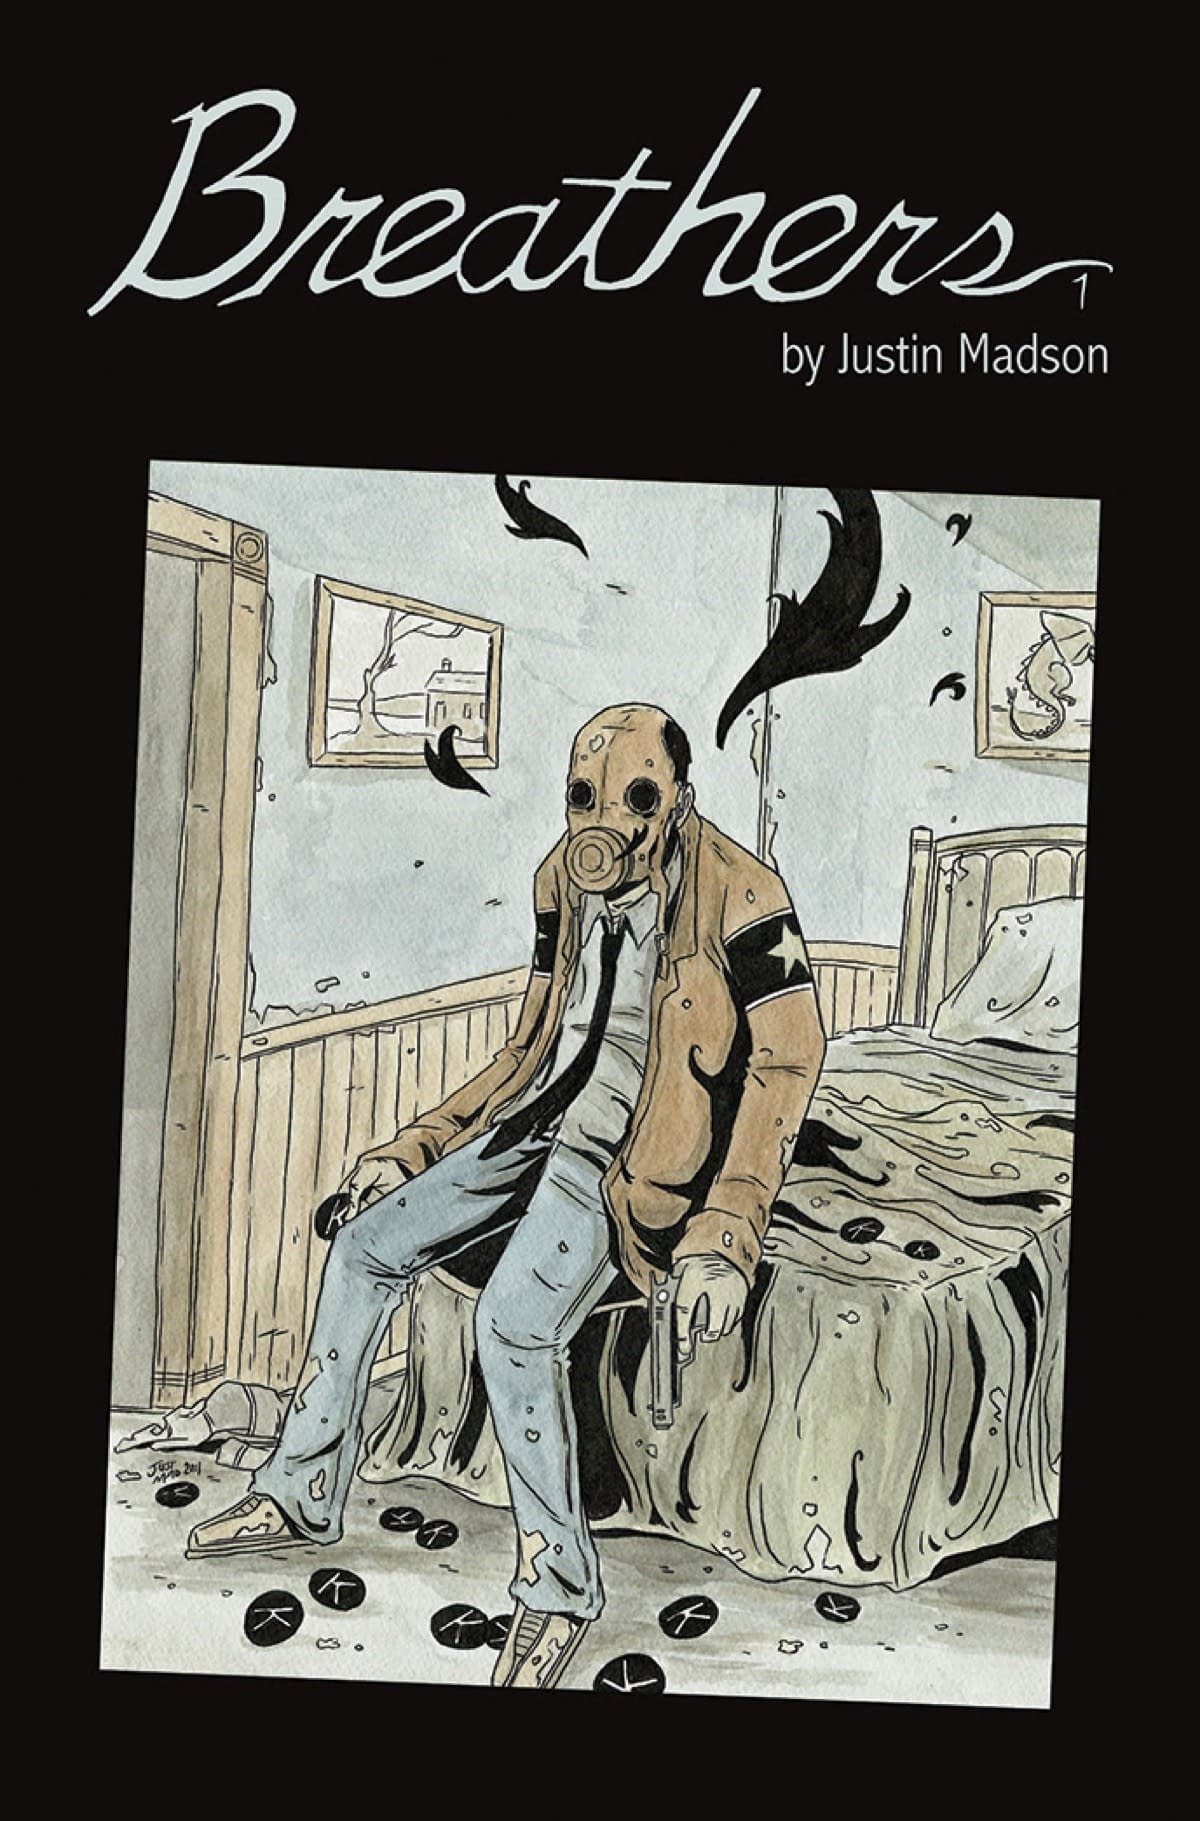 It's Alive! Launches IndieGoGo to Publish Justin Madson's Breathers